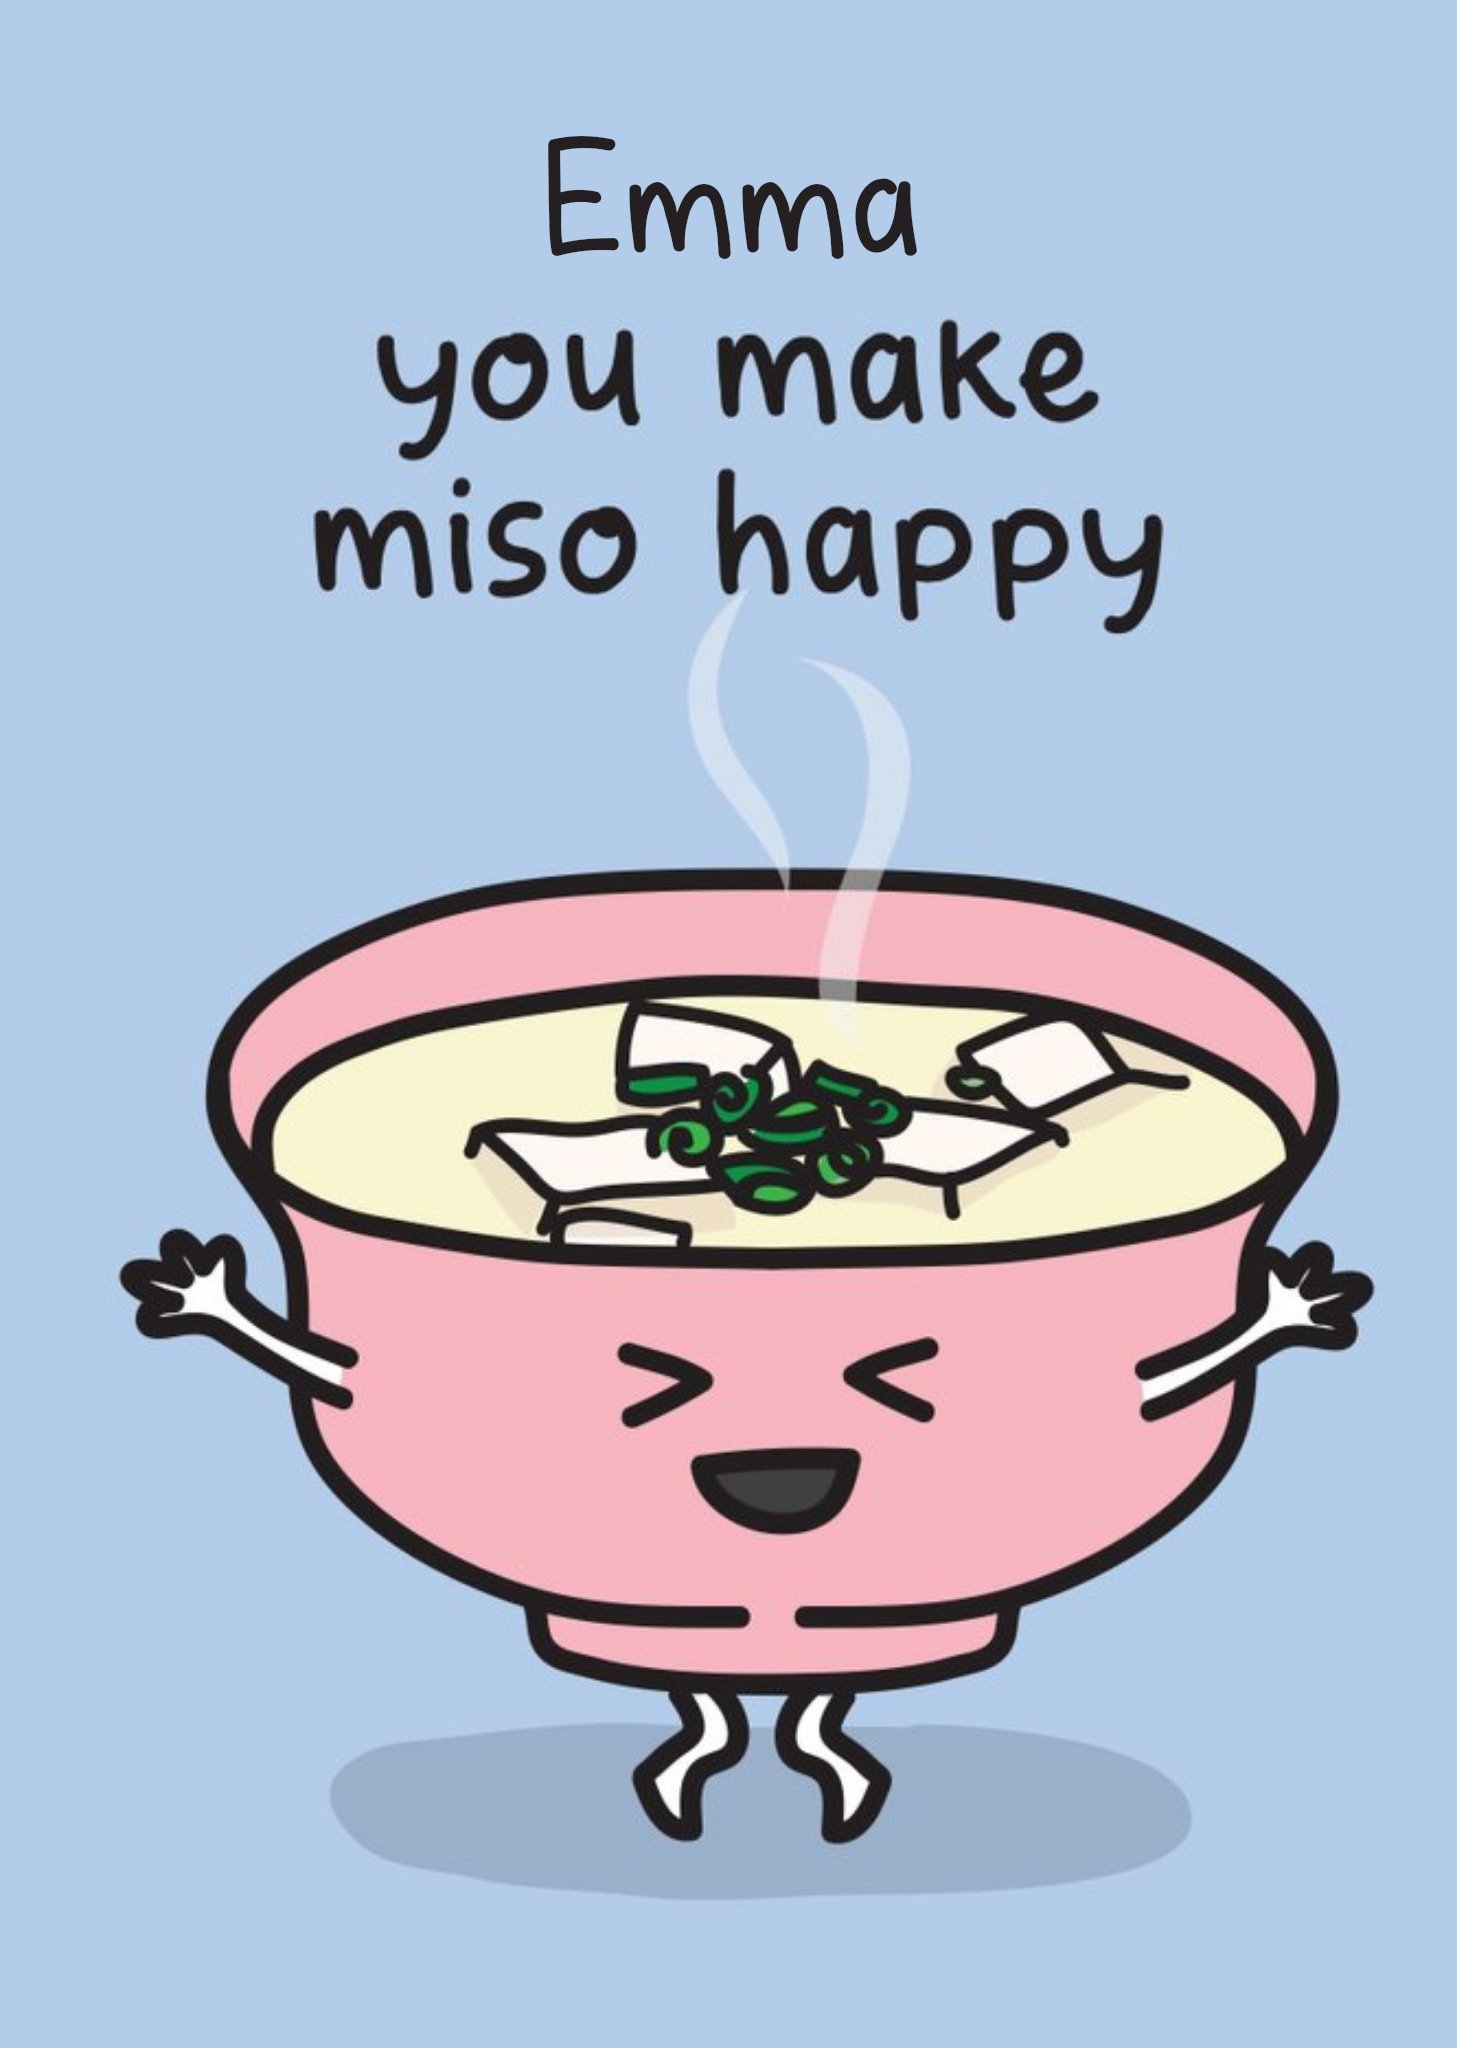 Moonpig Illustration Of A Bowl Of Miso Soup. You Make Miso Happy Birthday Card, Large